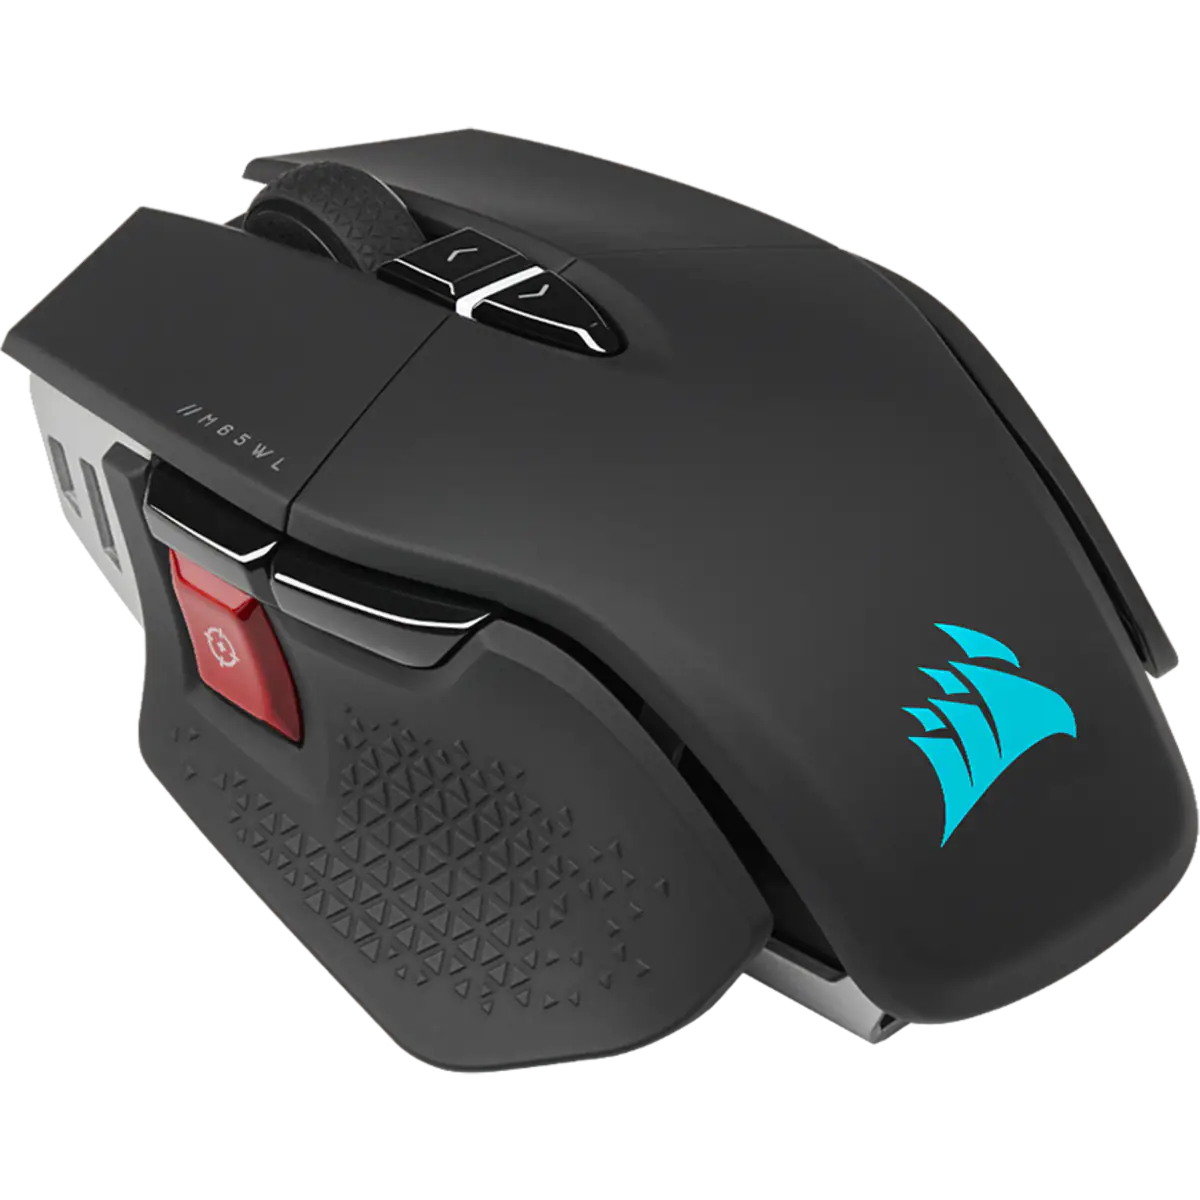 Corsair M65 RGB Ultra Wireless Mouse review 2